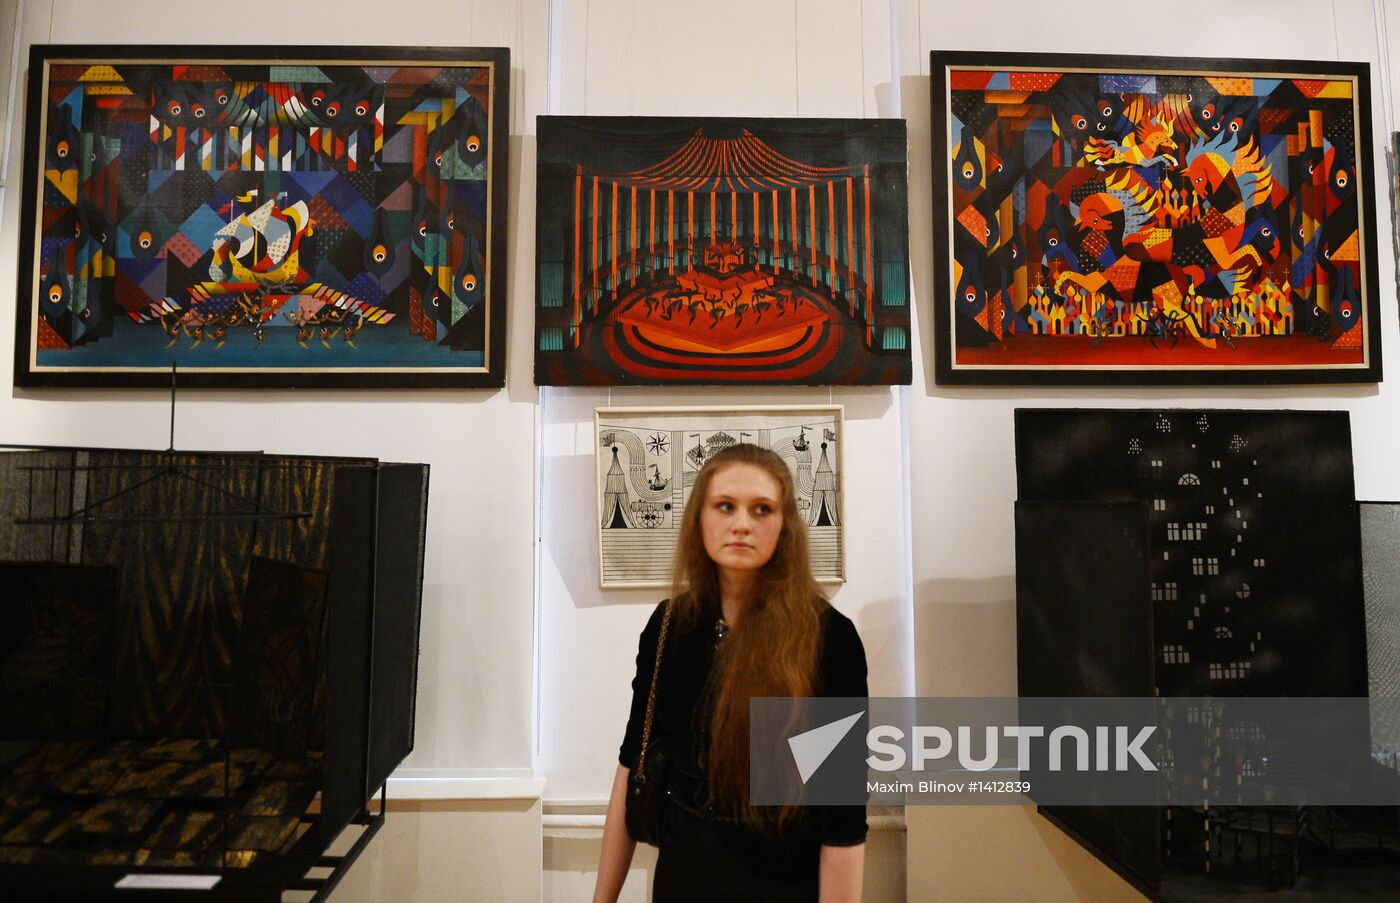 Exhibition "Boris Messerer. The Line of Fate" opens in Moscow